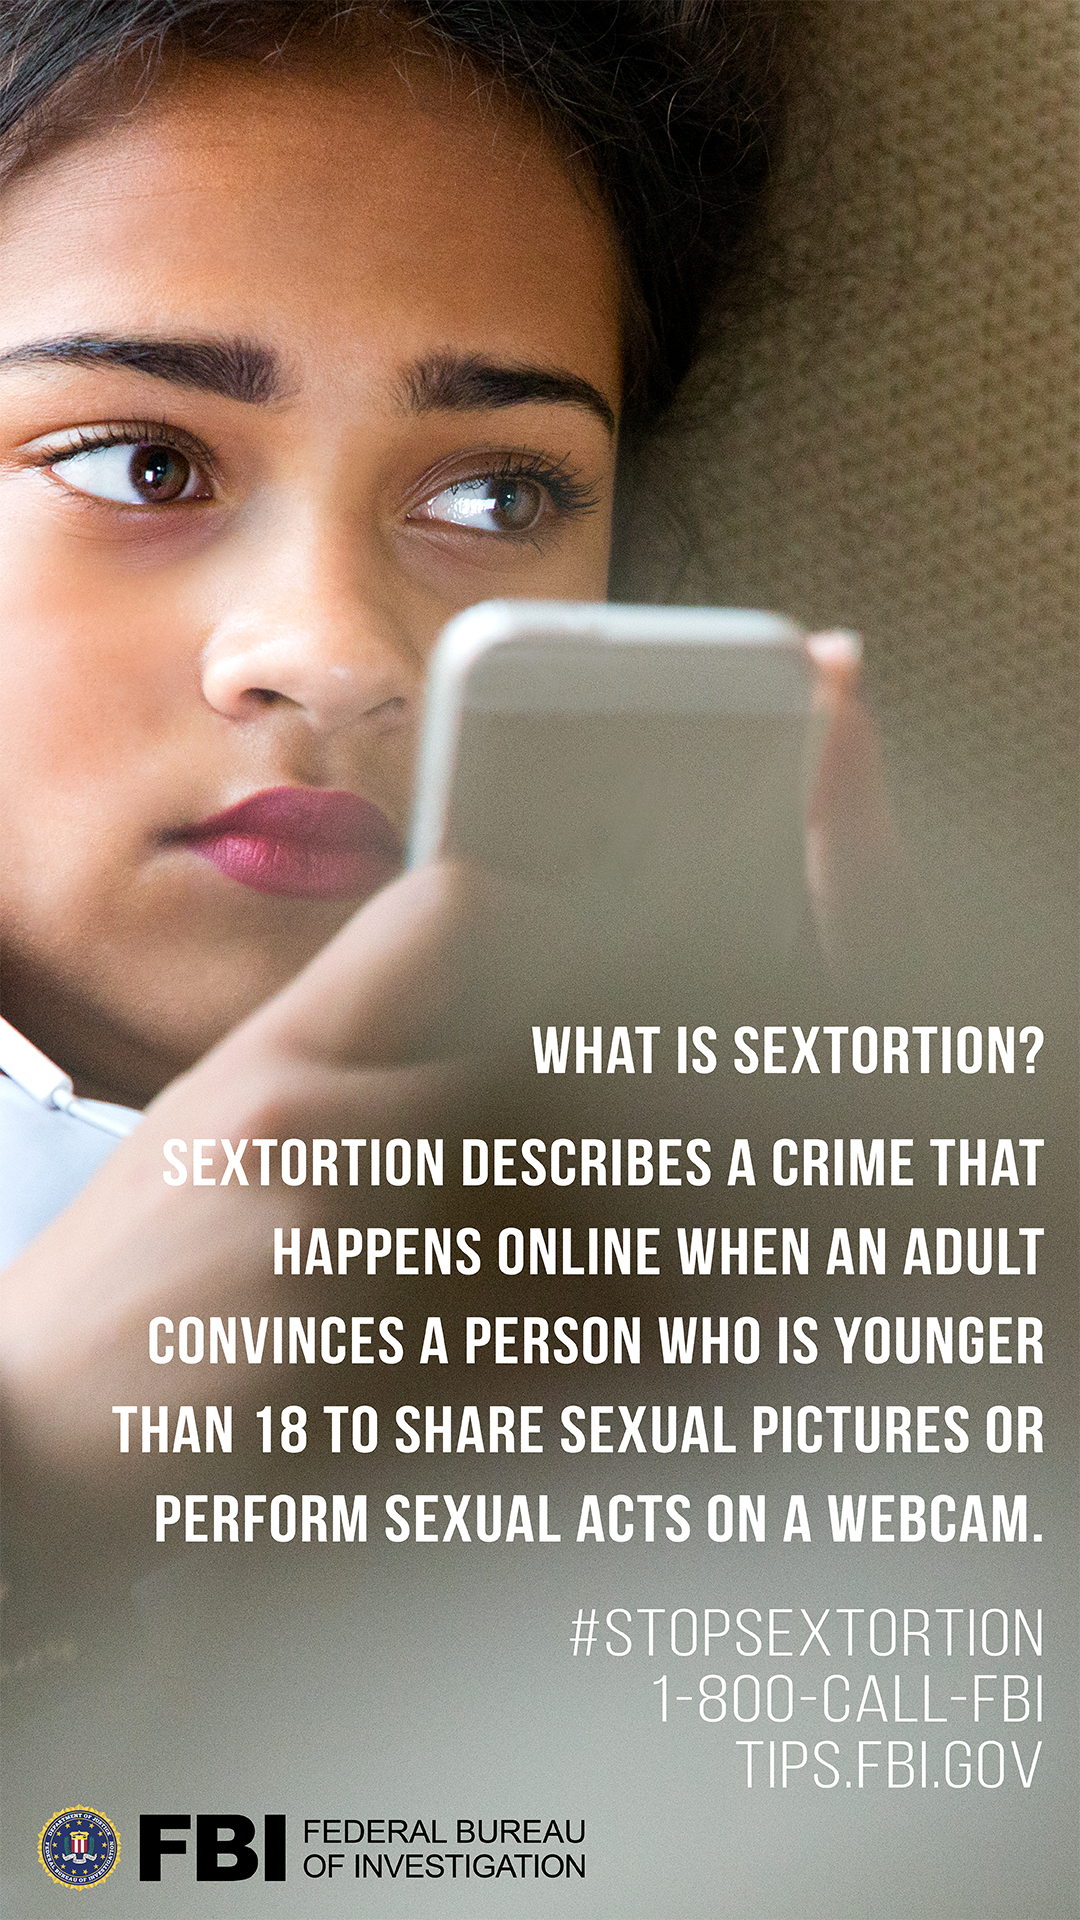 Anatomy of a sextortion scam